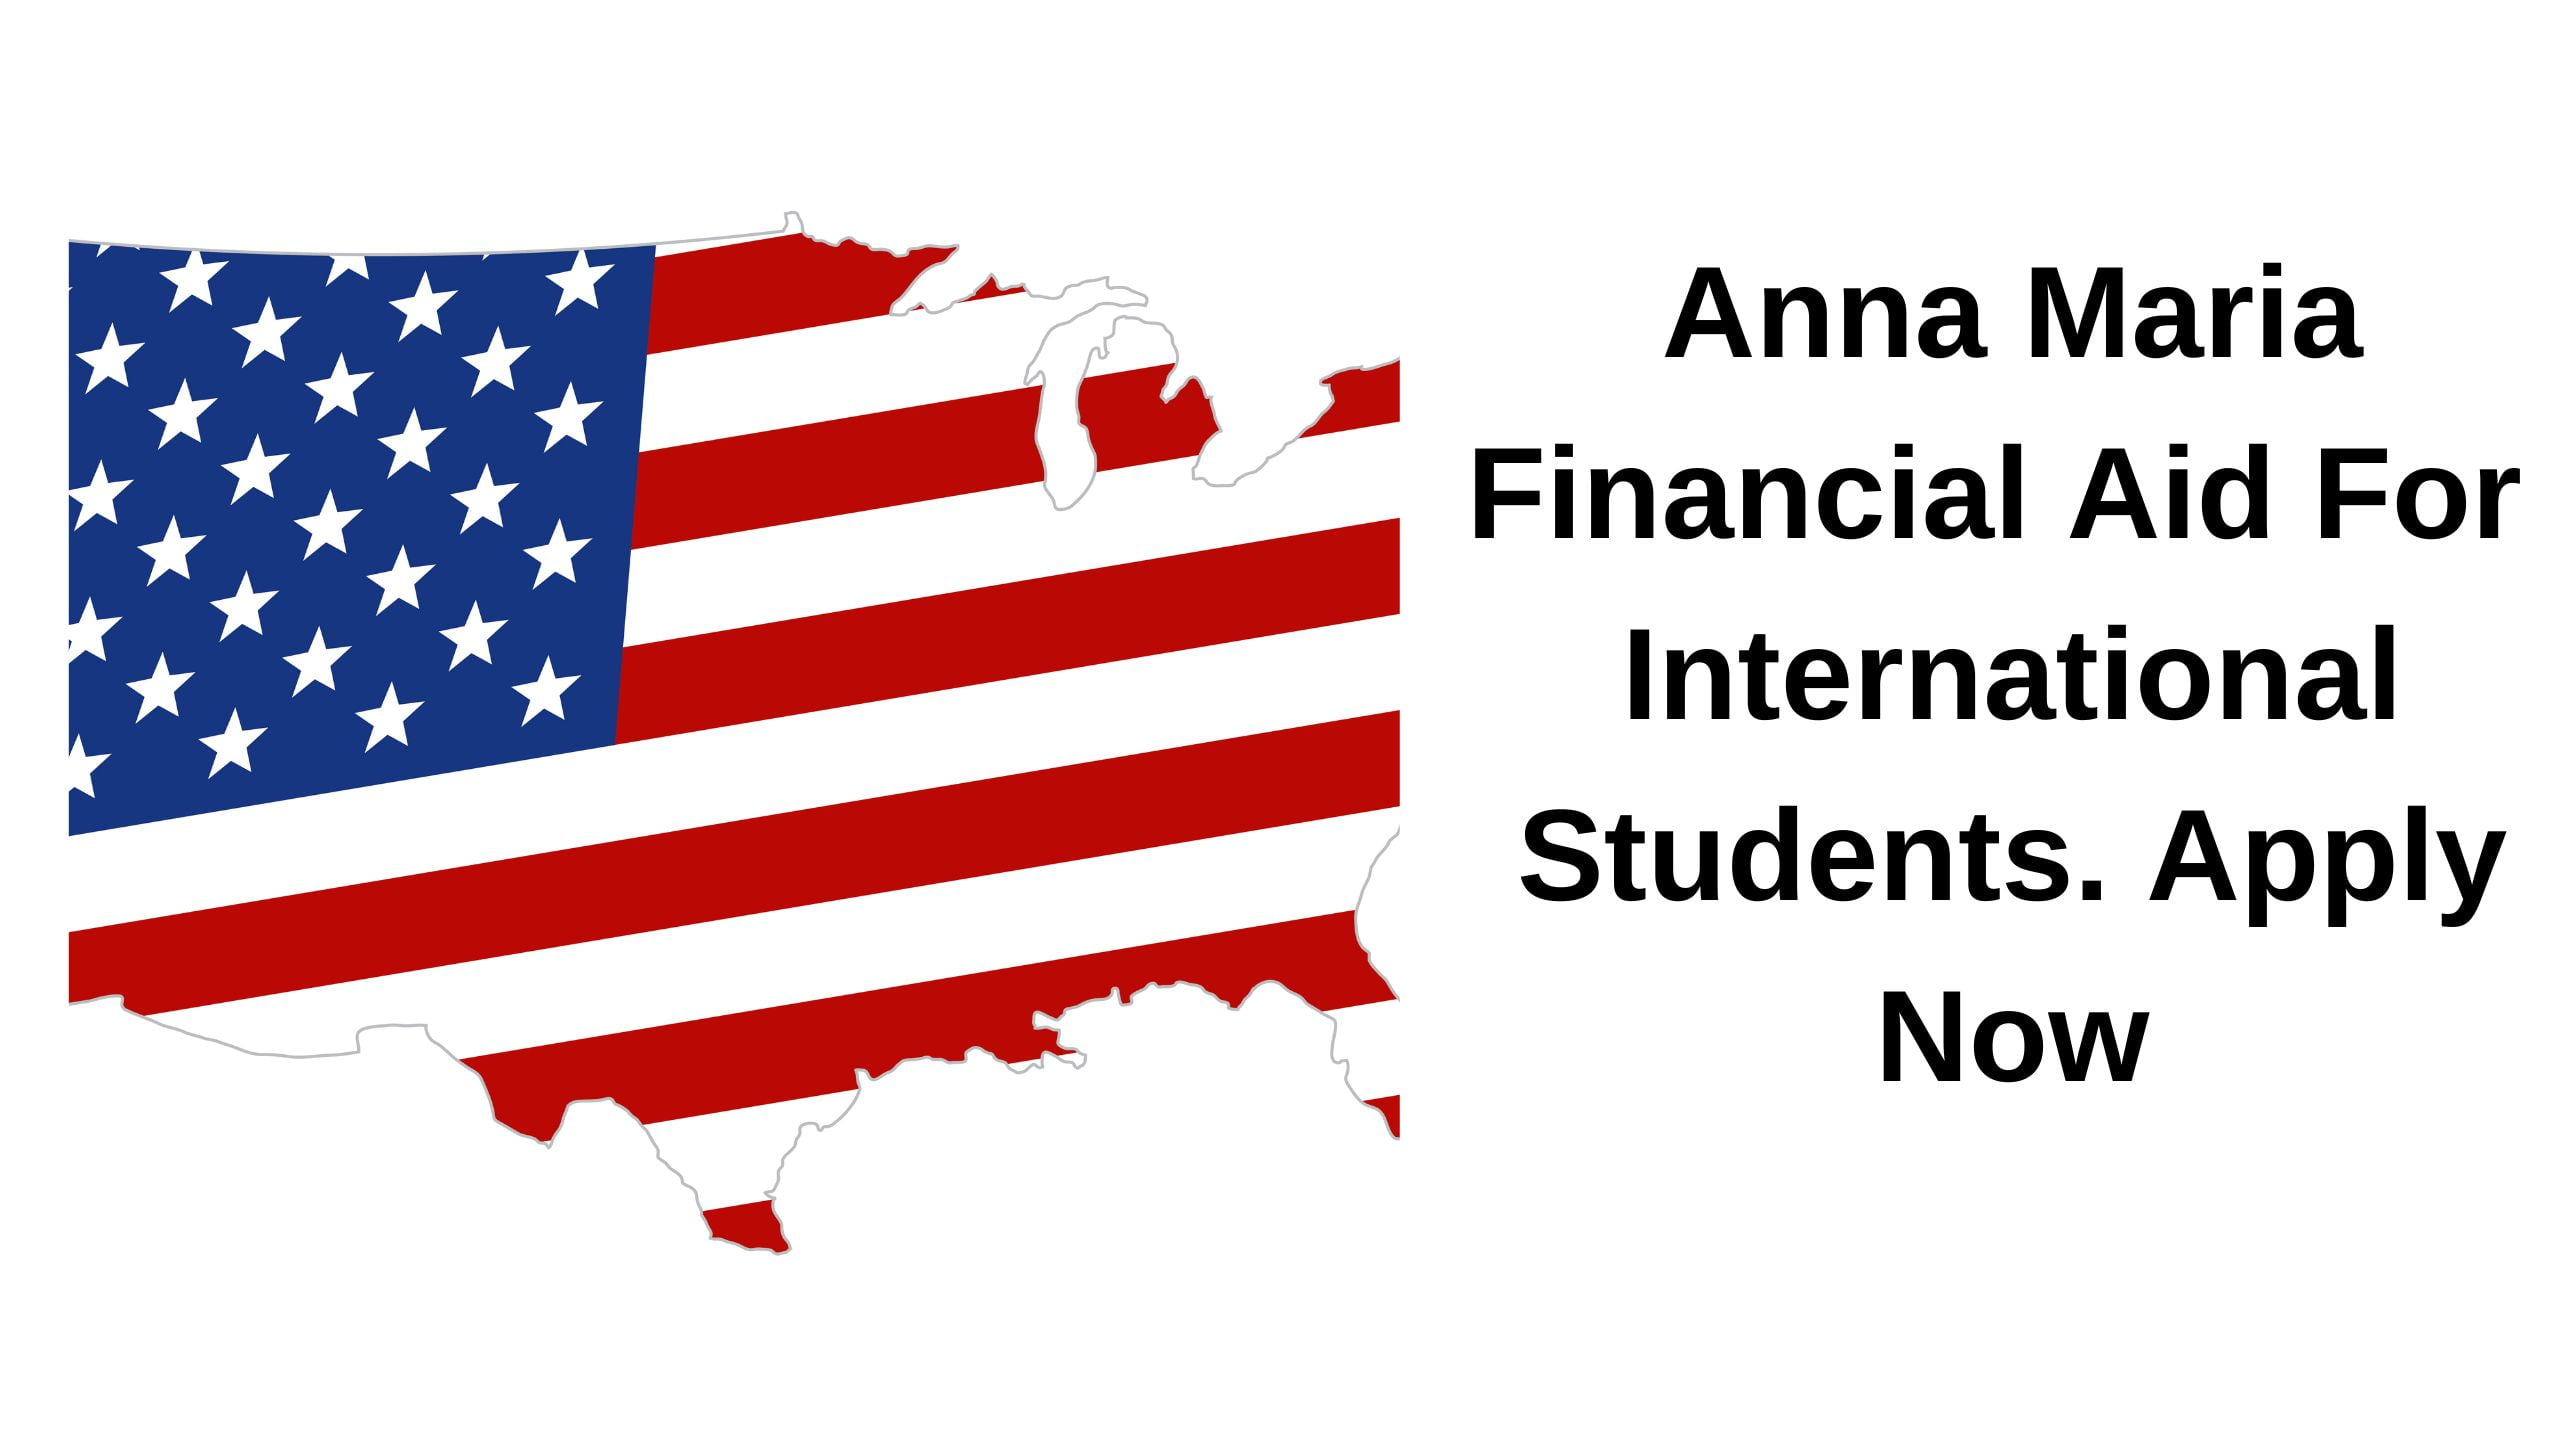 Anna Maria Financial Aid For International Students. Apply Now